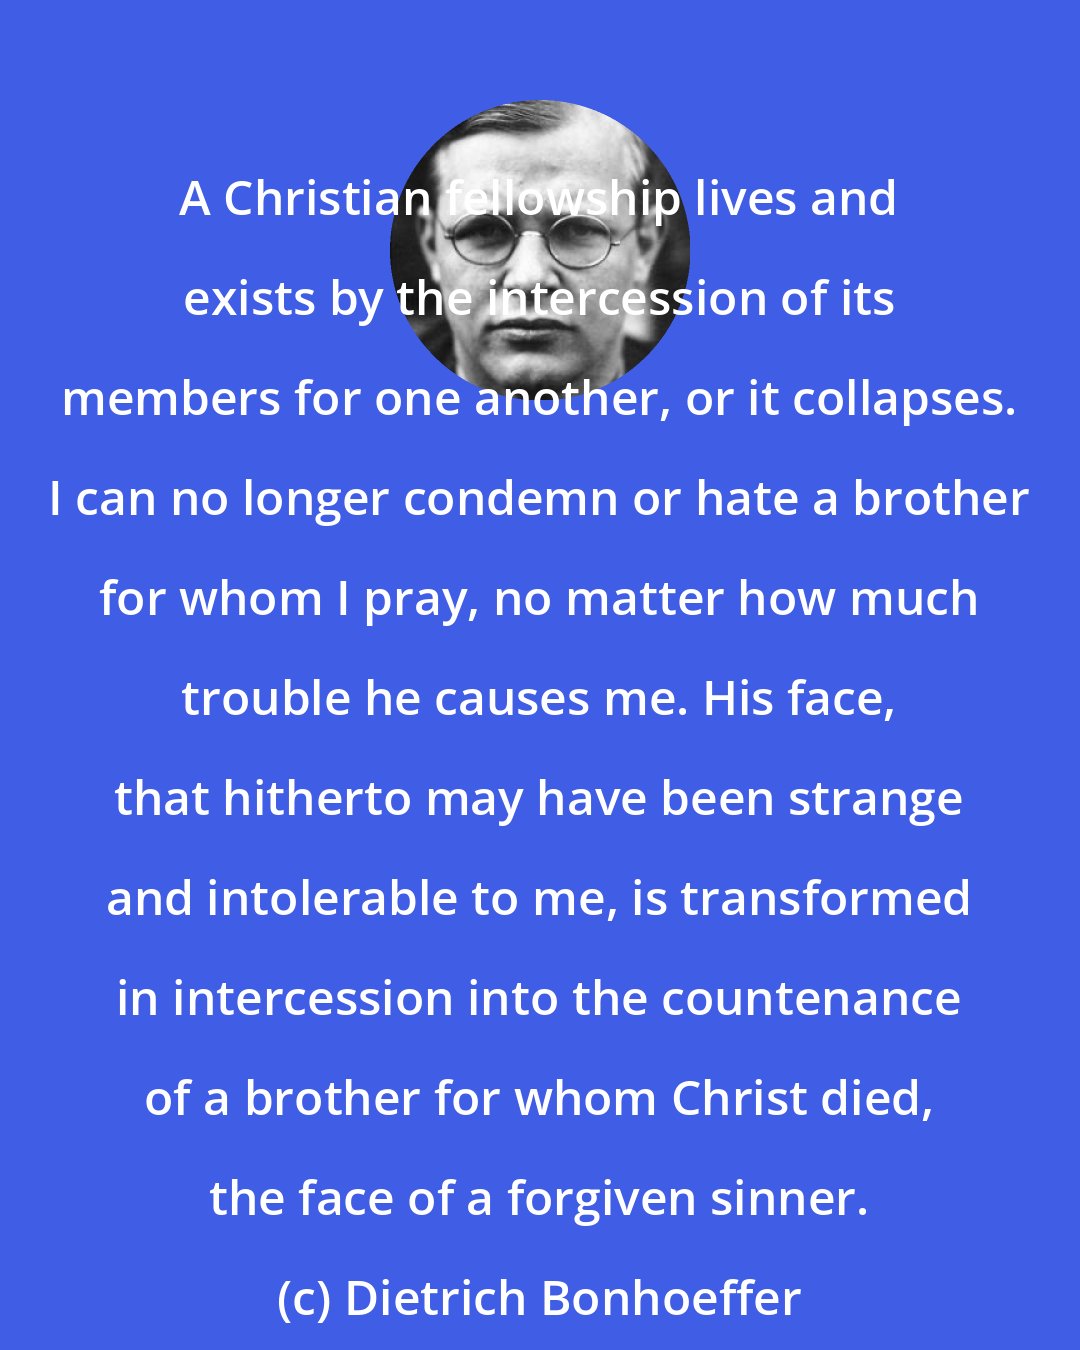 Dietrich Bonhoeffer: A Christian fellowship lives and exists by the intercession of its members for one another, or it collapses. I can no longer condemn or hate a brother for whom I pray, no matter how much trouble he causes me. His face, that hitherto may have been strange and intolerable to me, is transformed in intercession into the countenance of a brother for whom Christ died, the face of a forgiven sinner.